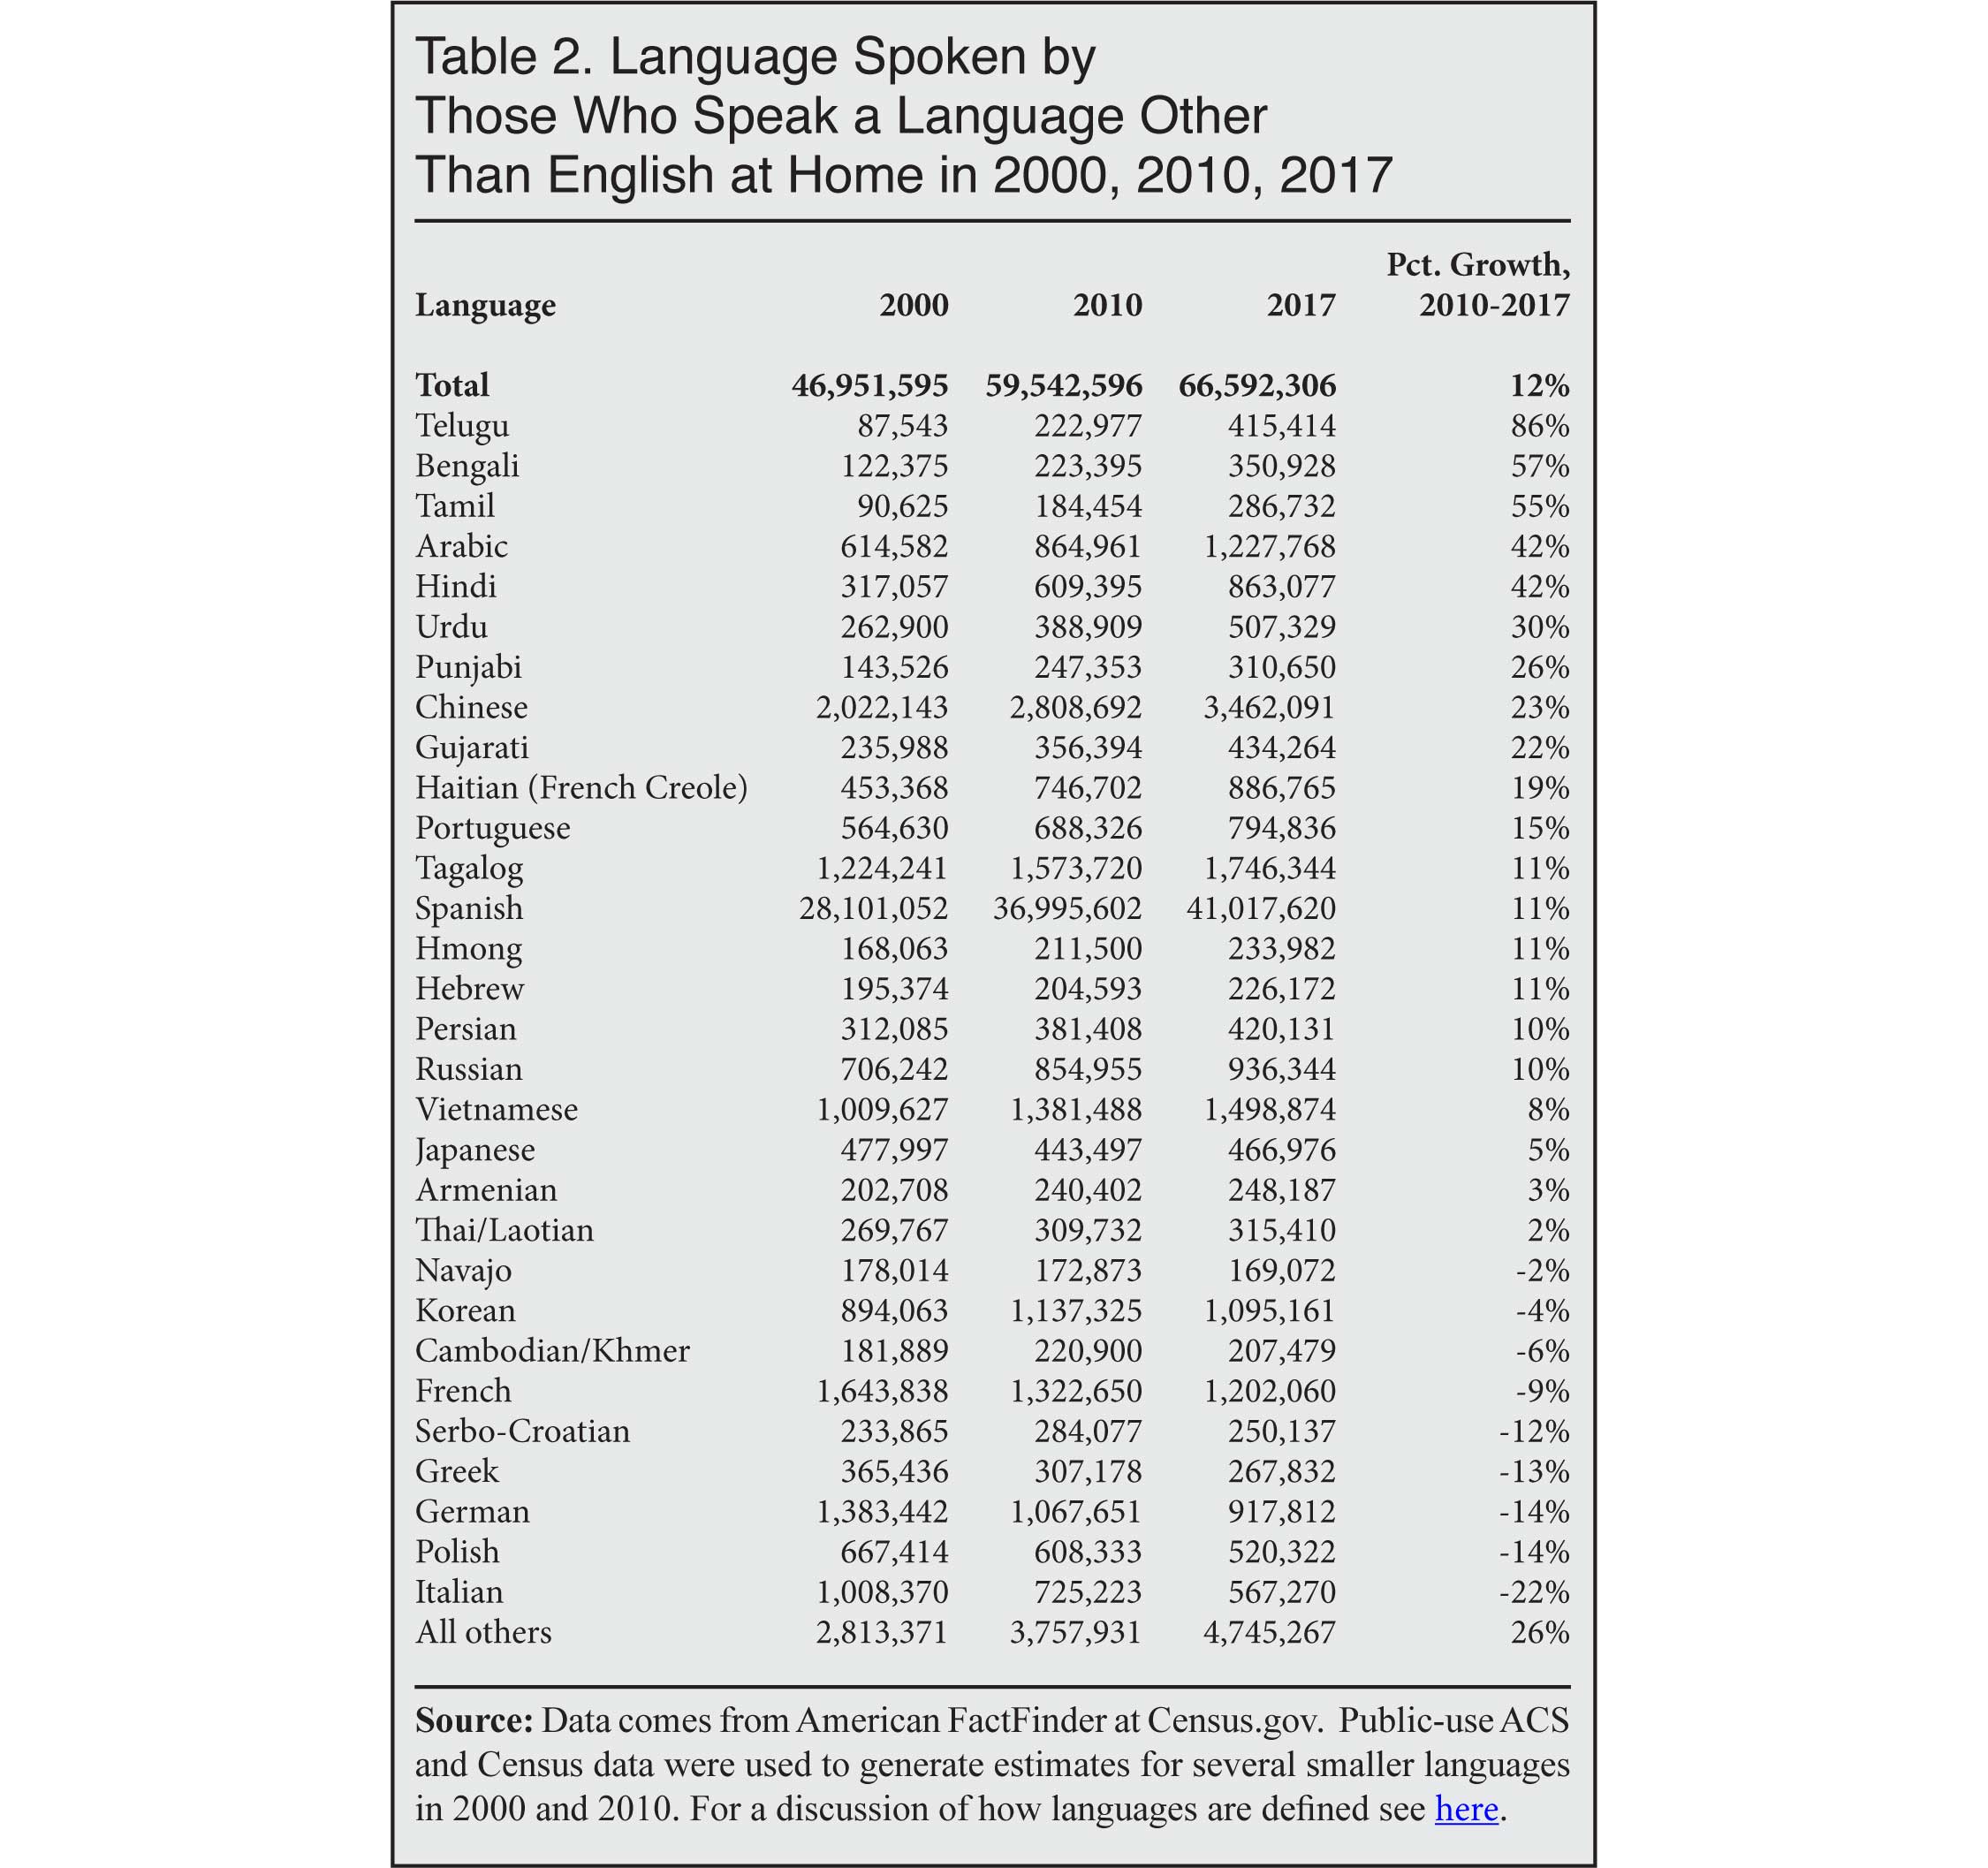 Table: Language Spoken by Those Who Speak a Language Other Than English at Home in 2000, 2010, 2017